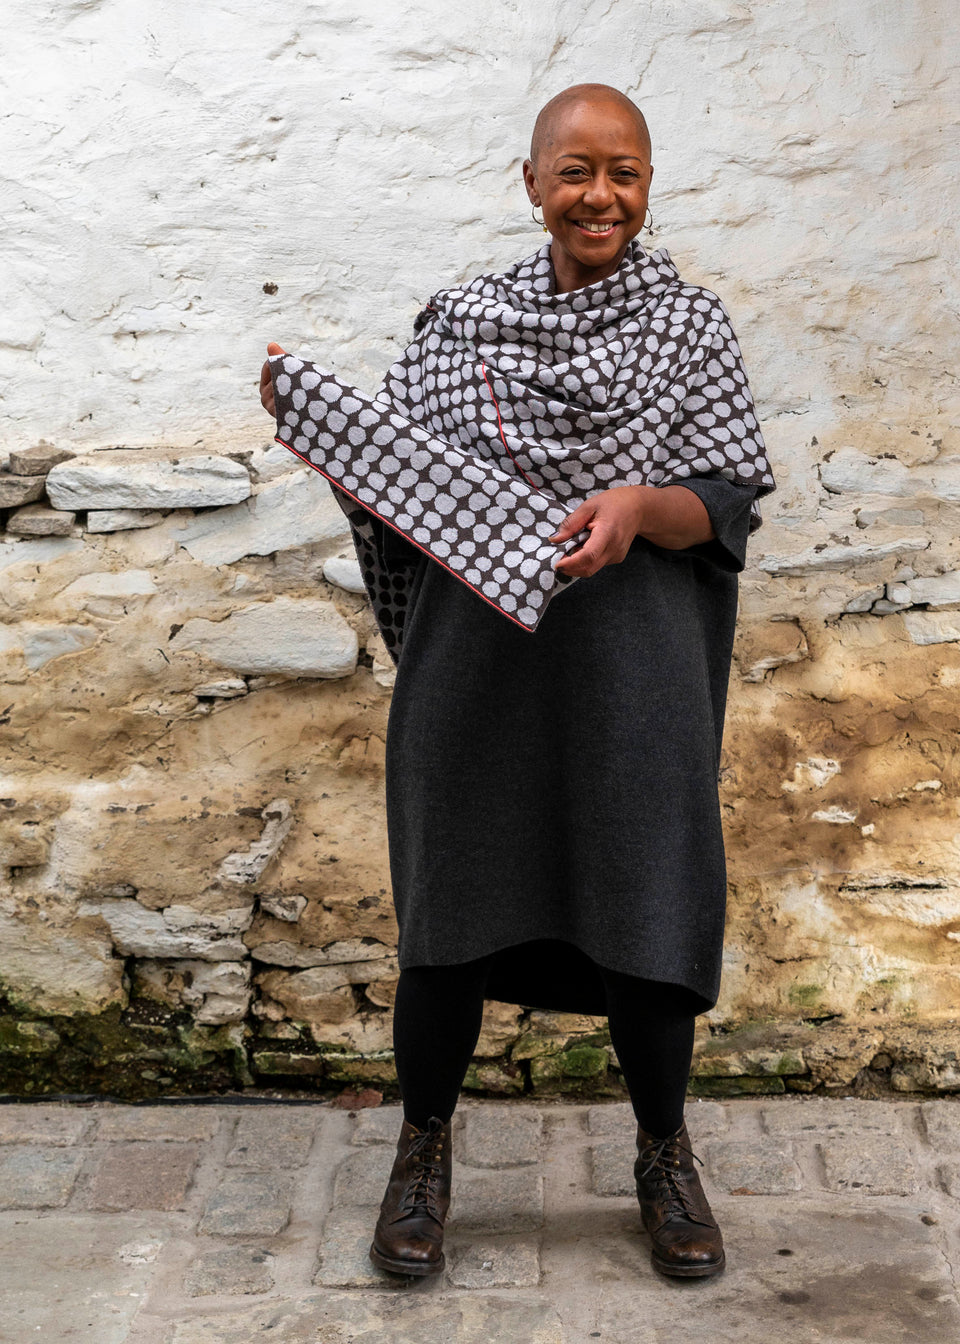 A black woman with a shaved head stands in a rustic stone building with whitewashed walls and a stone flat floor in Shetland.  She wears a finely knitted modern shawl around her shoulders. It is charcoal grey with pale grey irregular dots and a thin meandering line in cherry red. She also wears a charcoal woollen dress in a loose fit, black tights and dark brown brogue boots.